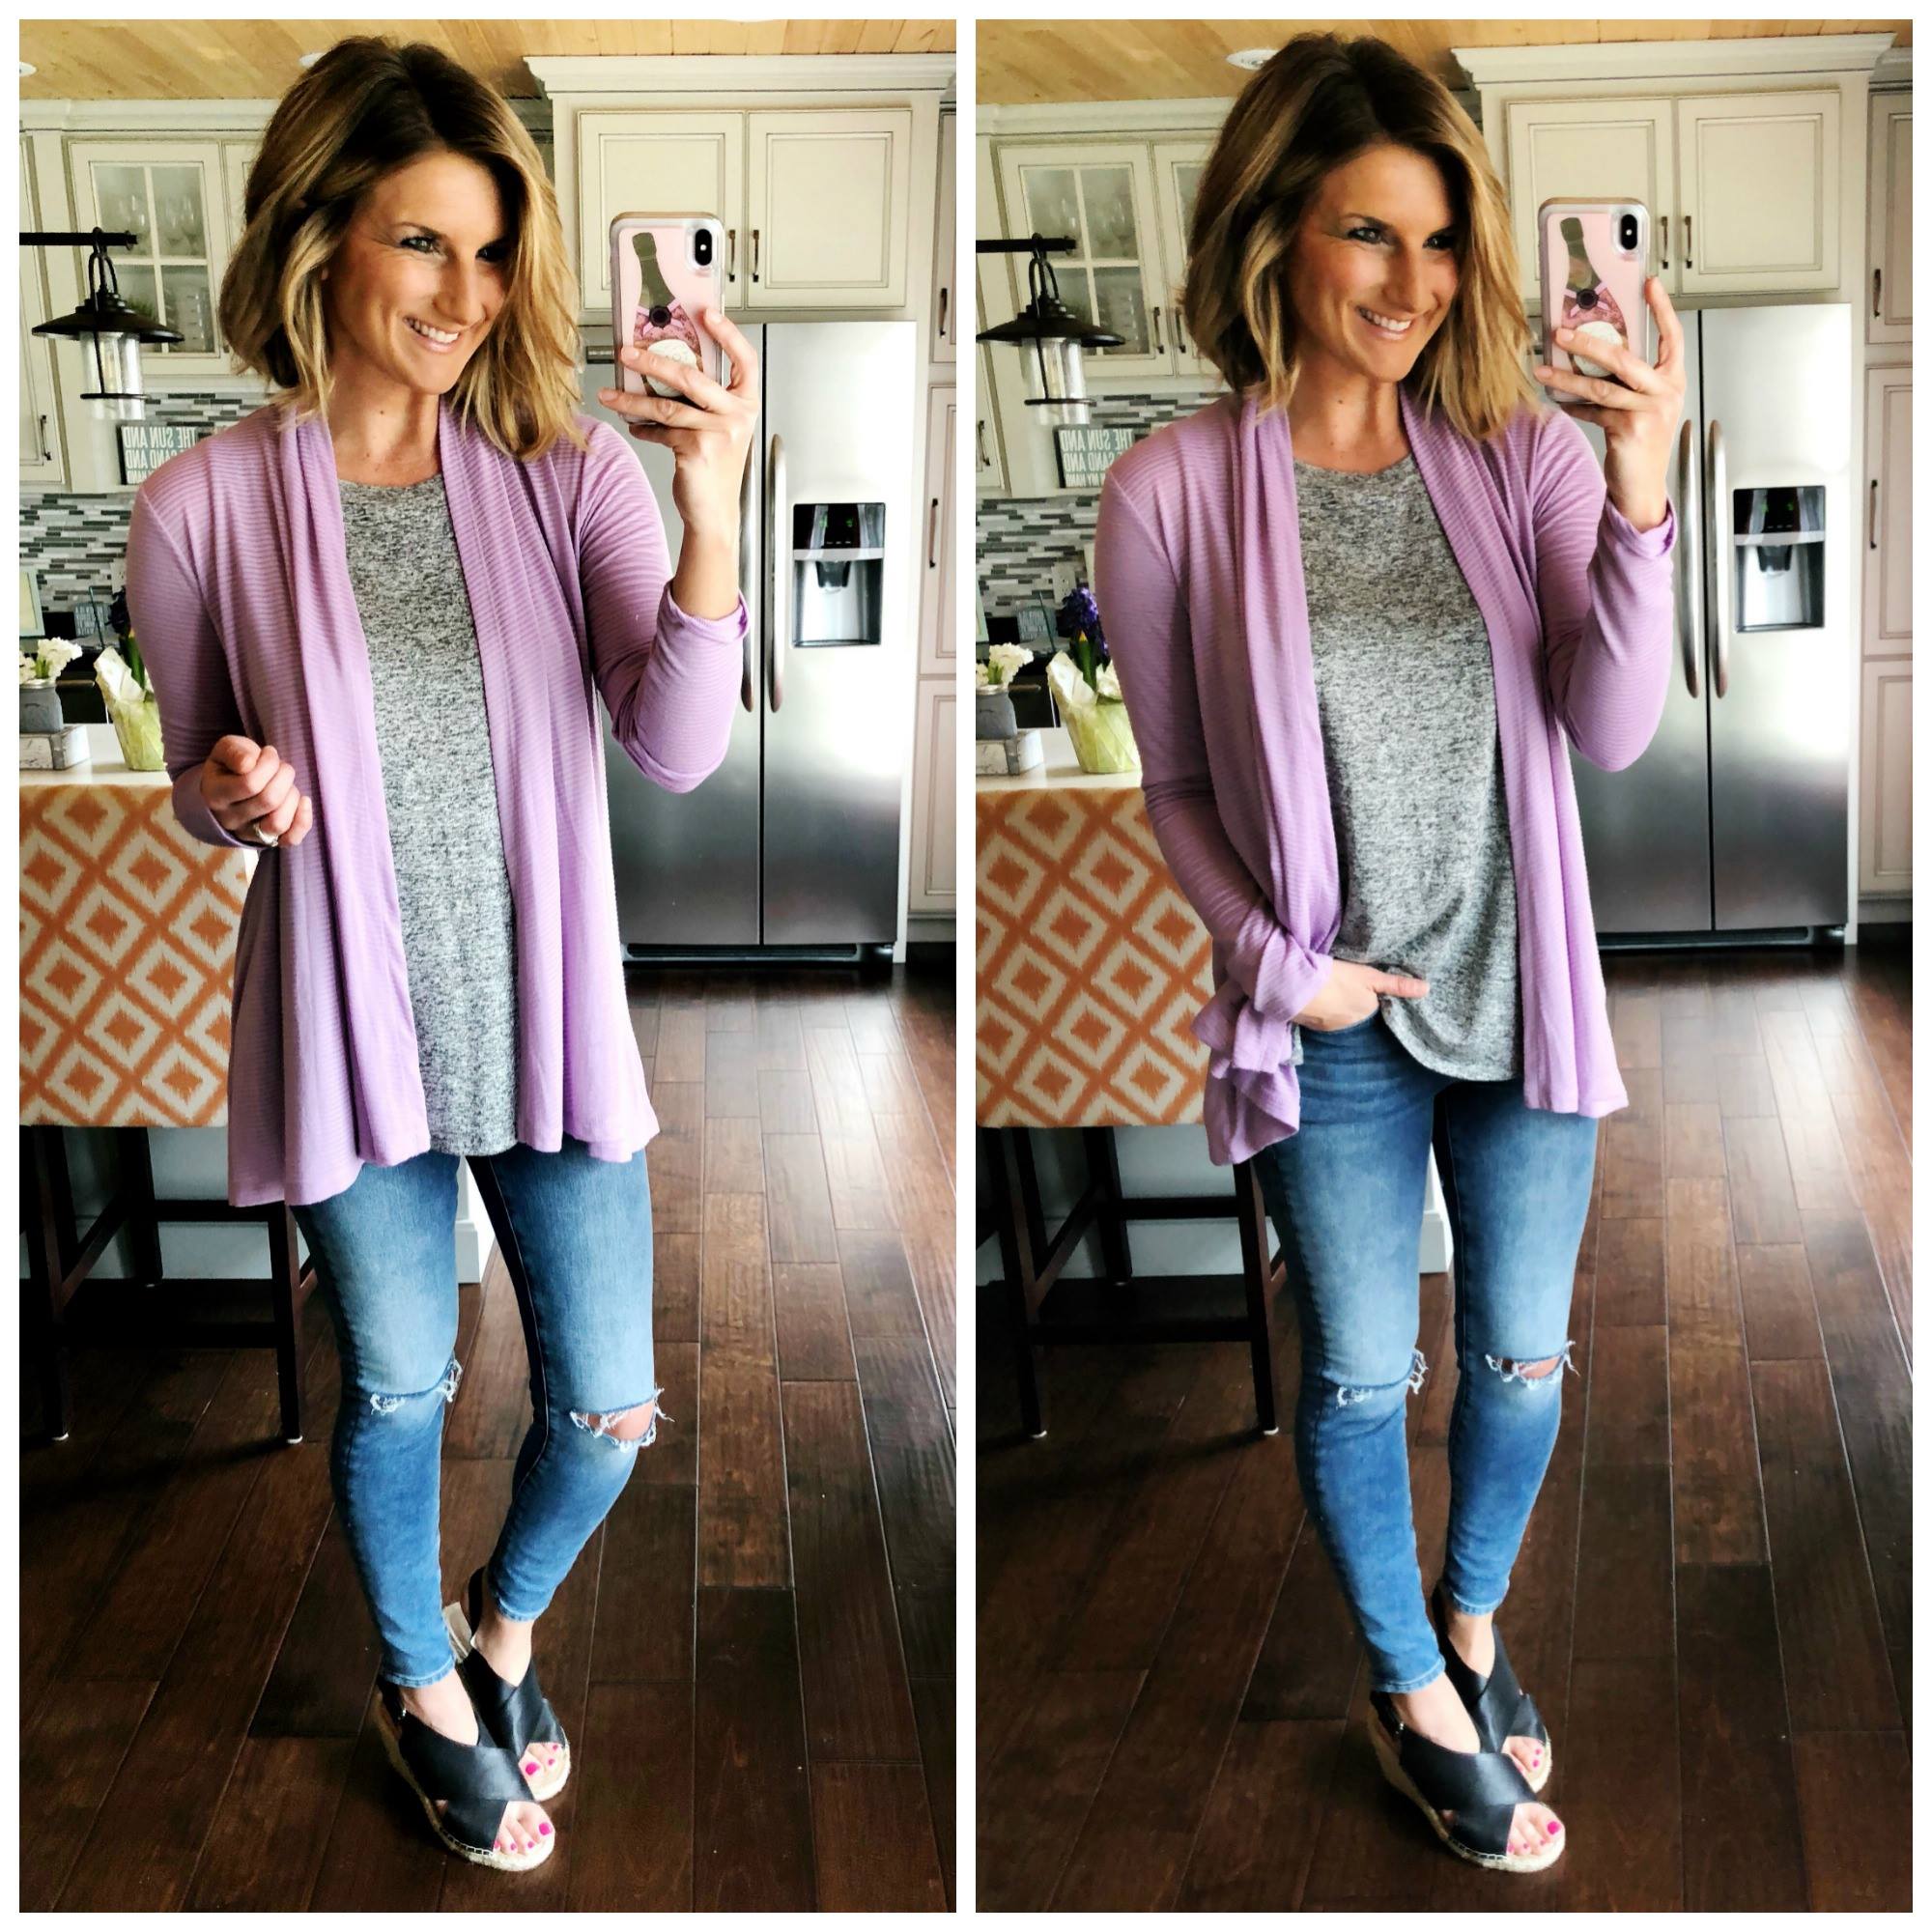 Casual Spring Outfit // Marled Grey Top + Distressed Jeggings + Lilac Cardigan + Espadrille Sandals // Easy Spring Outfit